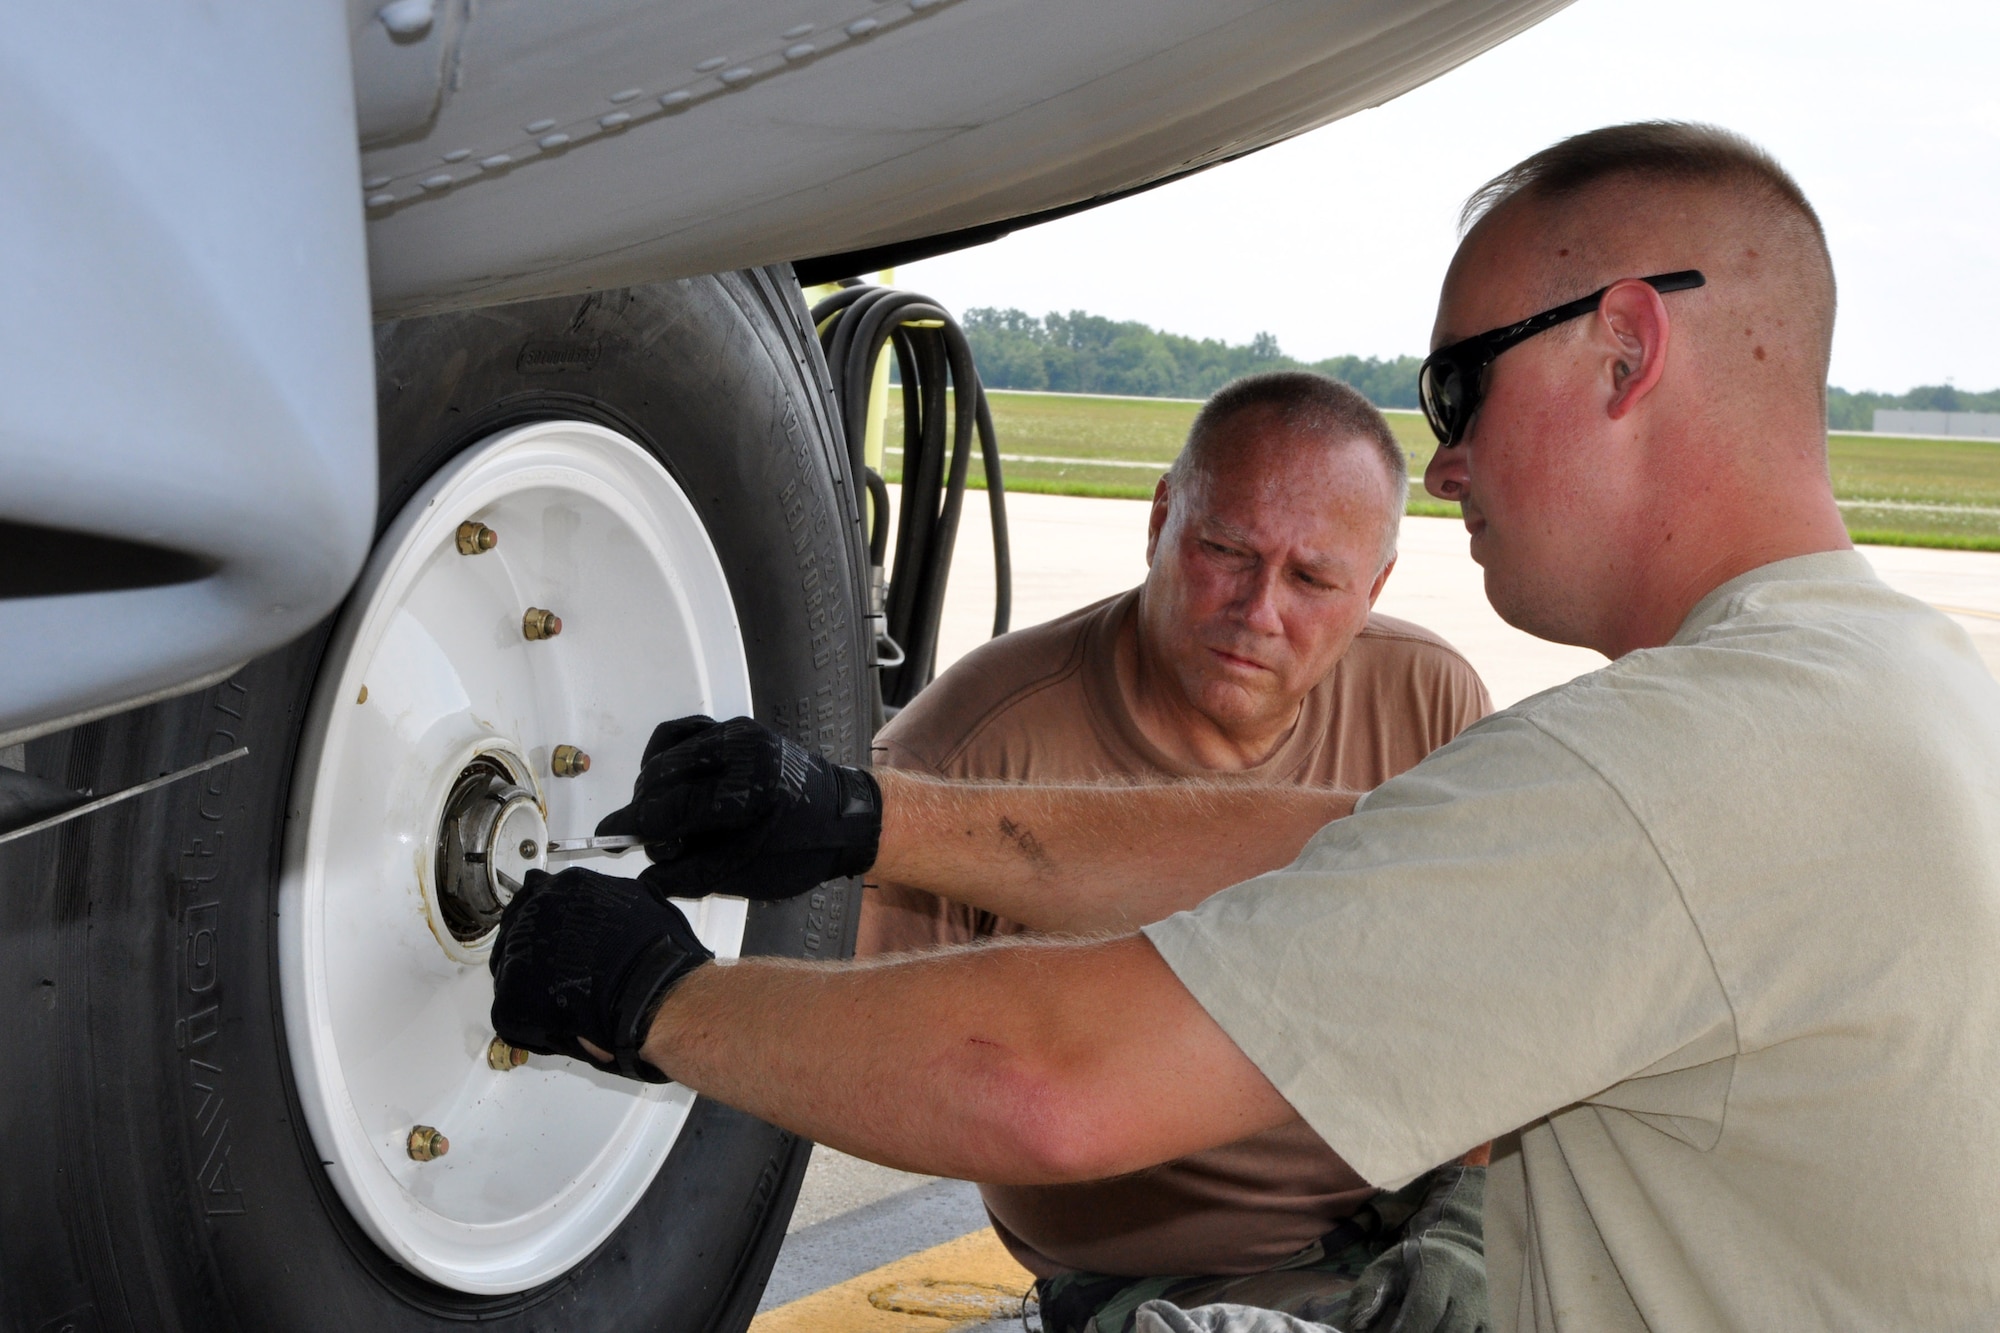 YOUNGSTOWN AIR RESERVE STATION, Ohio -- Air Force Reserve Staff Sgt. Evan Hart, a assistant crew chief with the 910th Aircraft Maintenance Squadron, puts the finishing touches on replacing a nose landing gear tire on his assigned C-130H Hercules cargo transport aircraft as the aircraft's primary crew chief, Master Sgt. Ernie Johnson, also with the 910th AMXS, checks his work on the flightline here, August 2, 2011. Sergeants Hart and Johnson are performing the work as part of the continuously scheduled maintenance that keeps the 12 C-130s assigned to the 910th Airlift Wing in good flying order and ready to complete the wing's airlift, airdrop and aerial spray missions anytime, anywhere around the globe at a moment's notice. U.S. Air Force photo by Master Sgt. Bob Barko Jr.